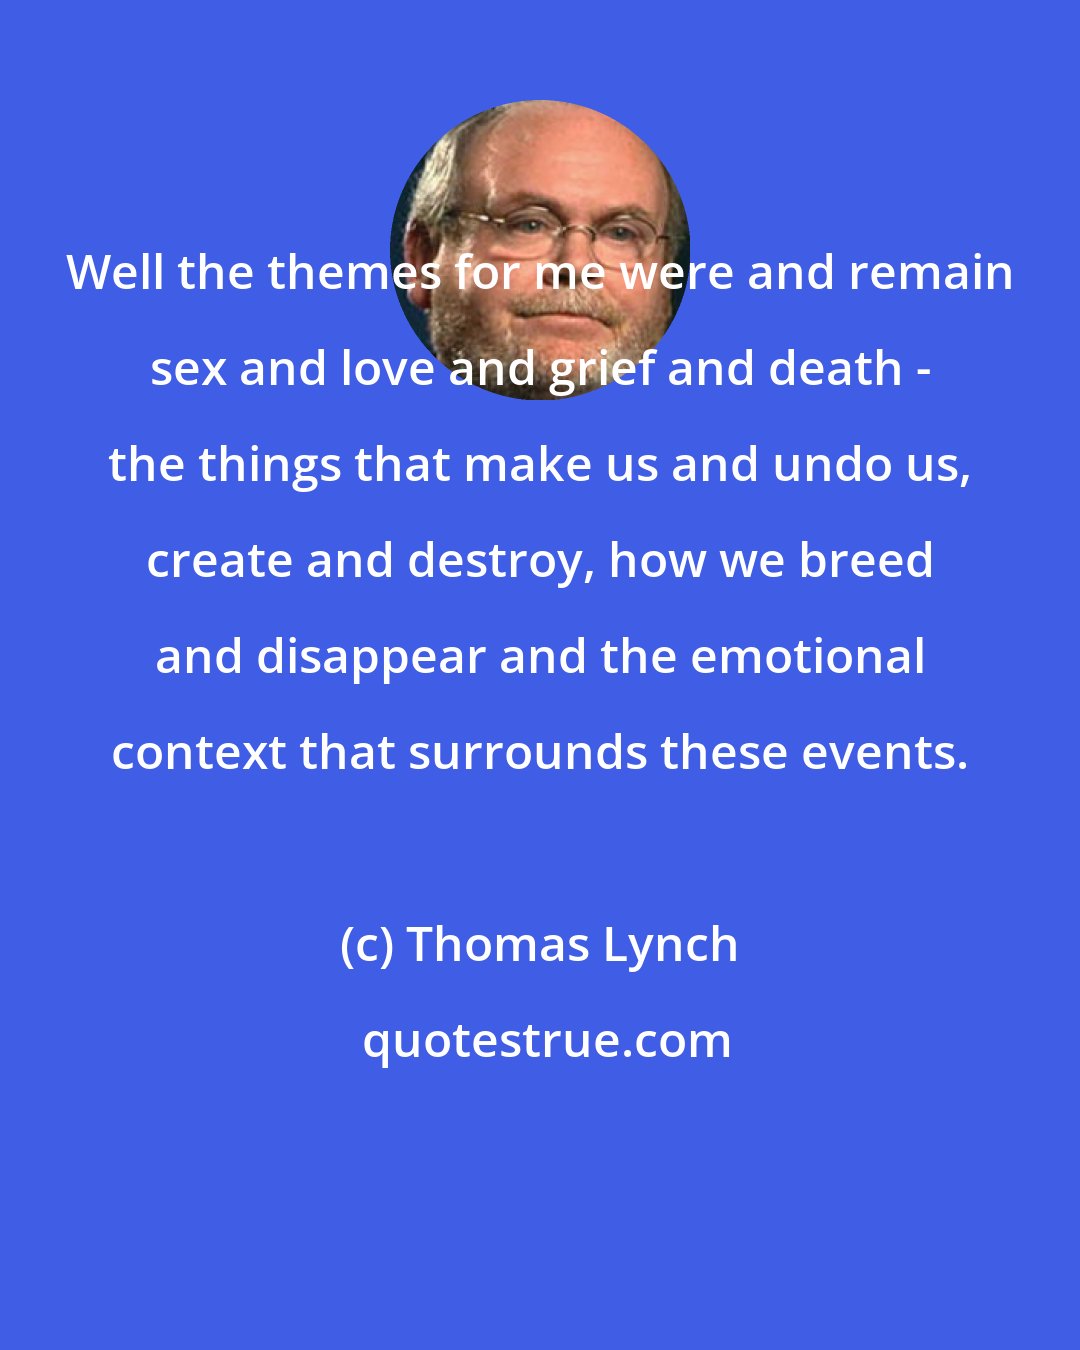 Thomas Lynch: Well the themes for me were and remain sex and love and grief and death - the things that make us and undo us, create and destroy, how we breed and disappear and the emotional context that surrounds these events.